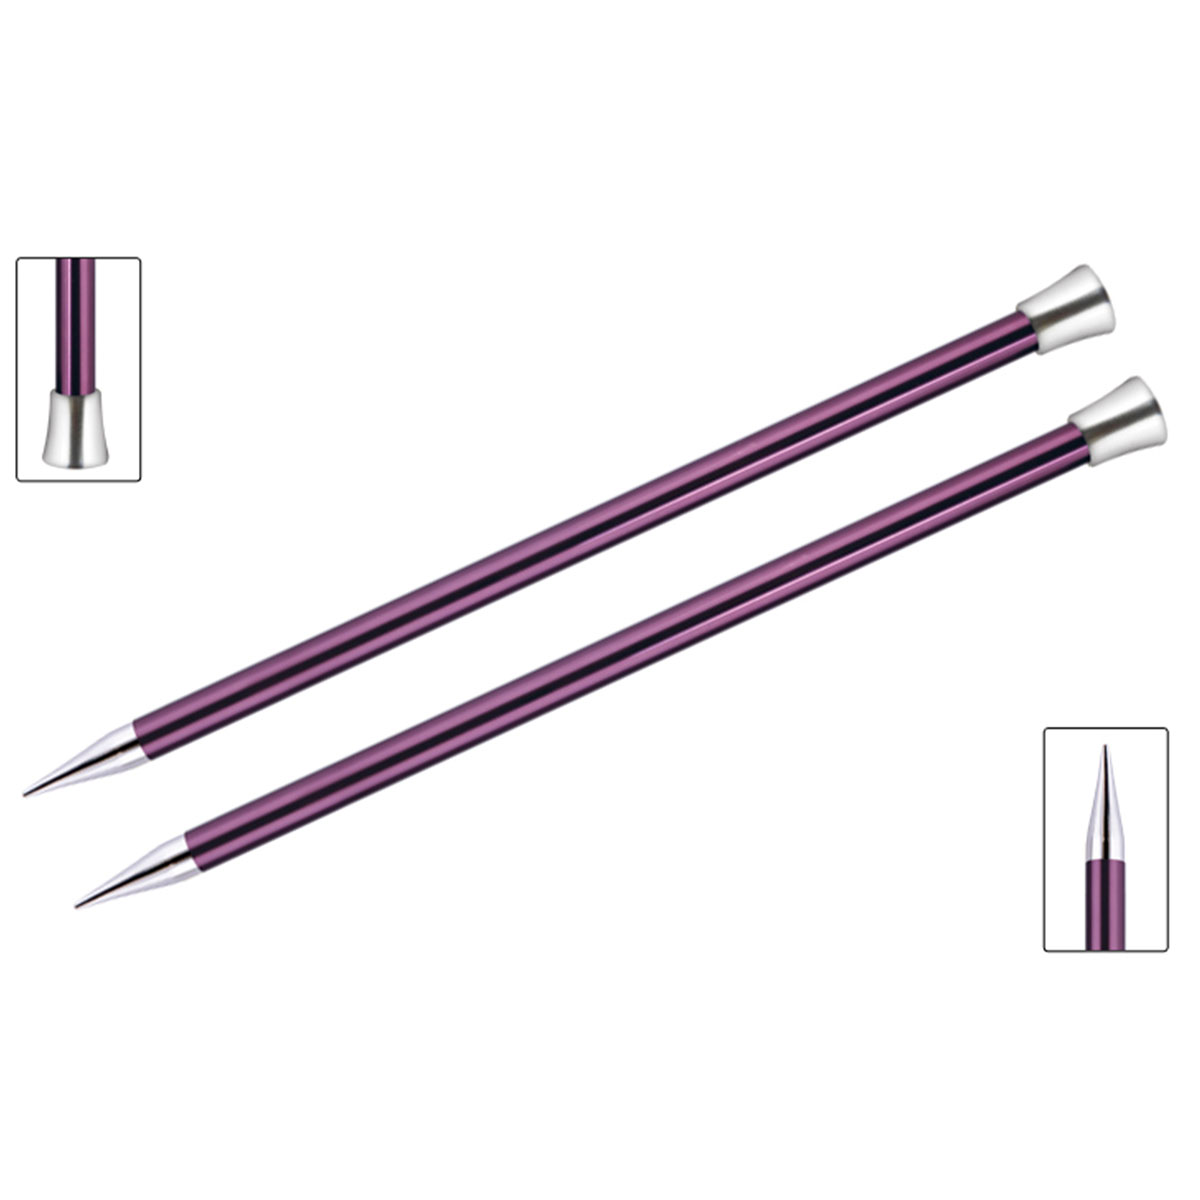 Knitter's Pride Zing Single Pointed Needles - US 17 (12.0mm) - 14